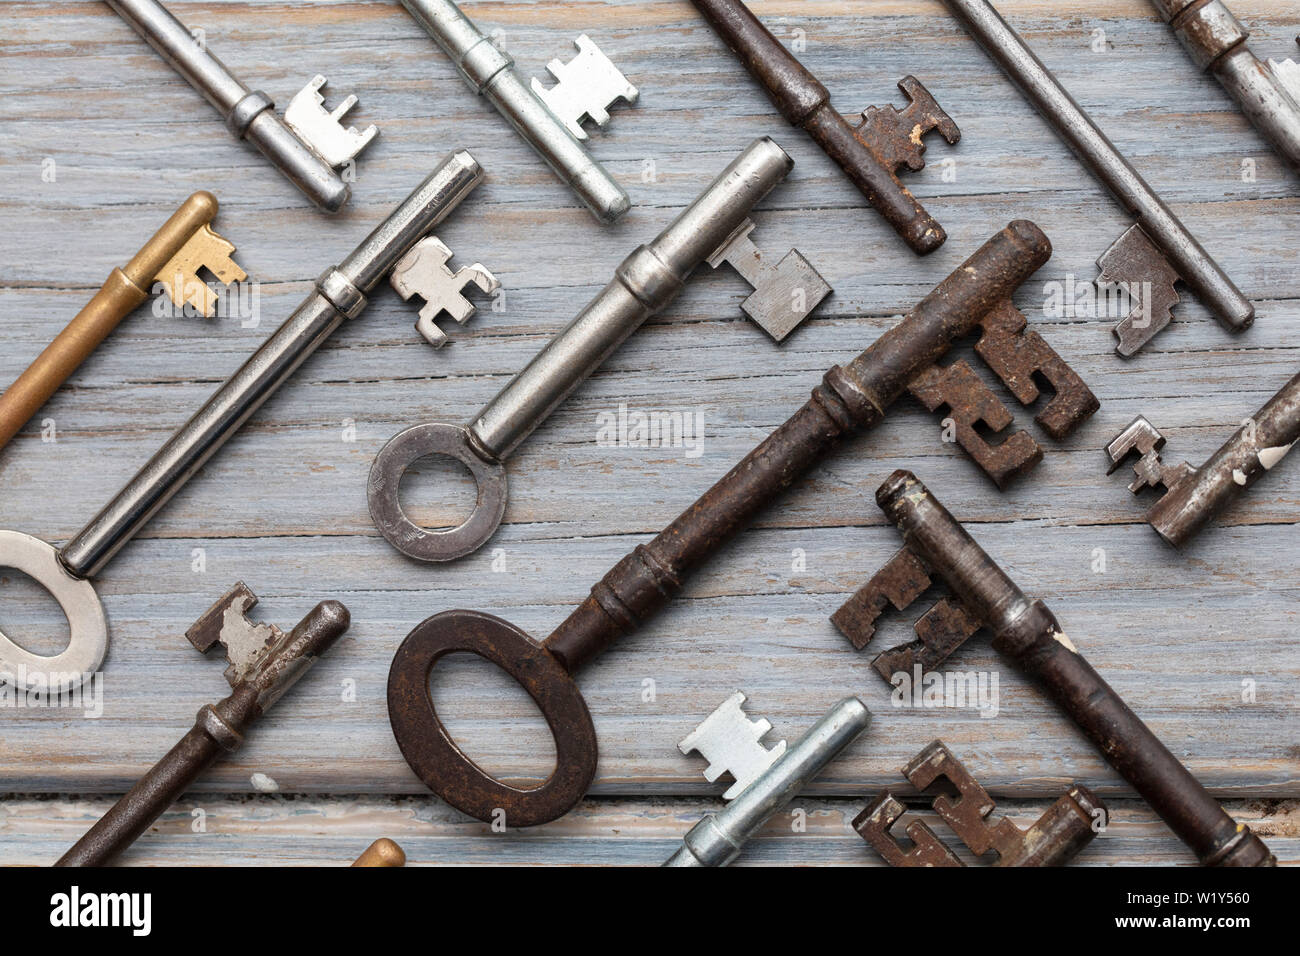 Vintage old fashioned keys on a rustic wooden background. Security concept Stock Photo